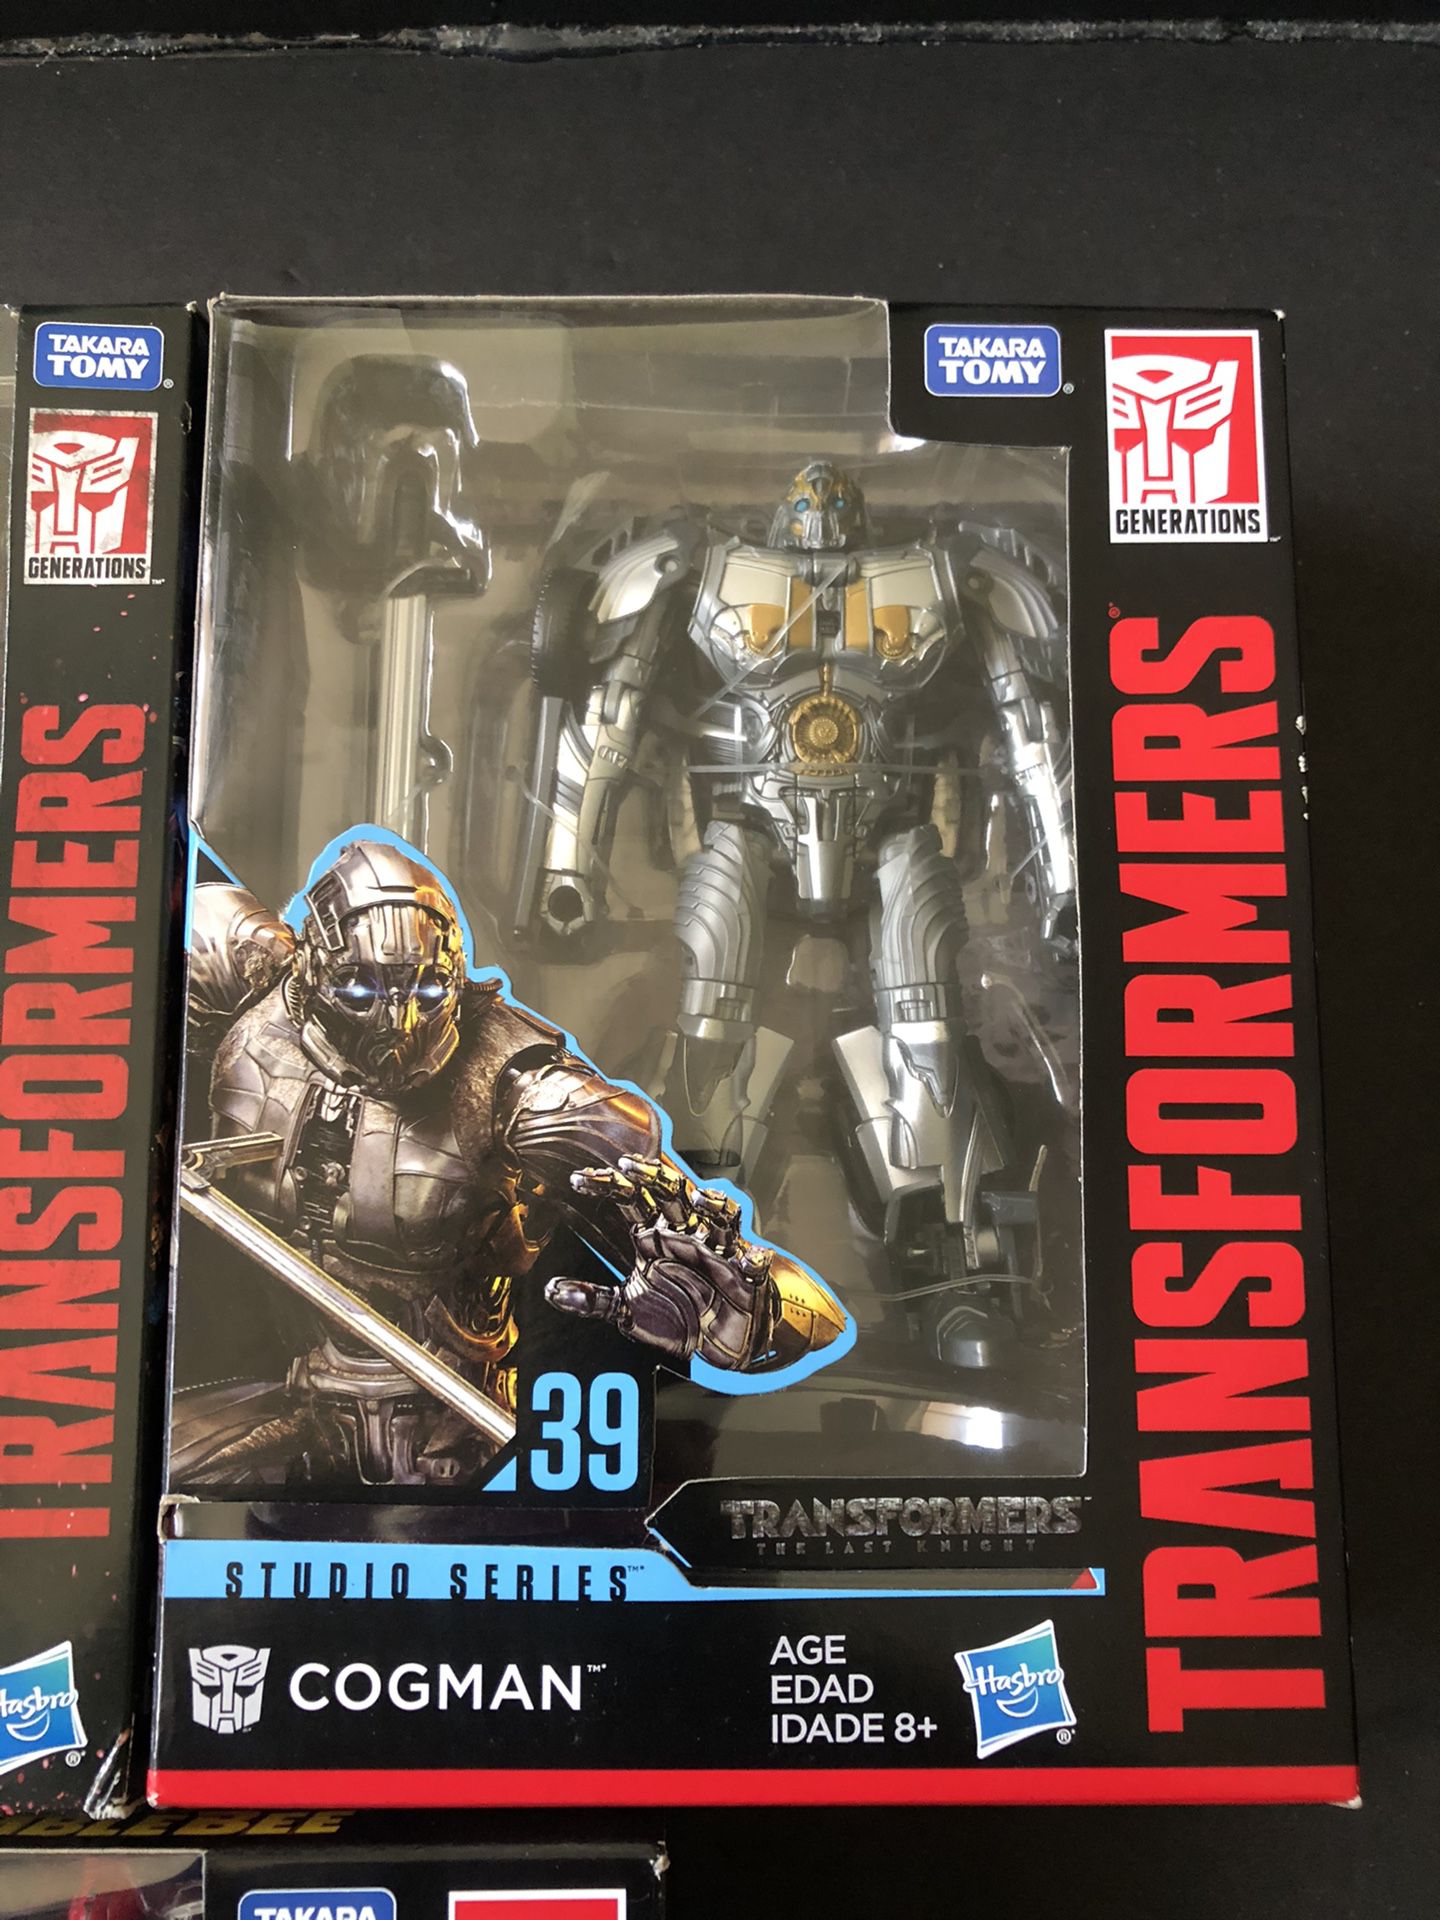 Transformers Studios Series Cogman and Shatter Deluxe Class